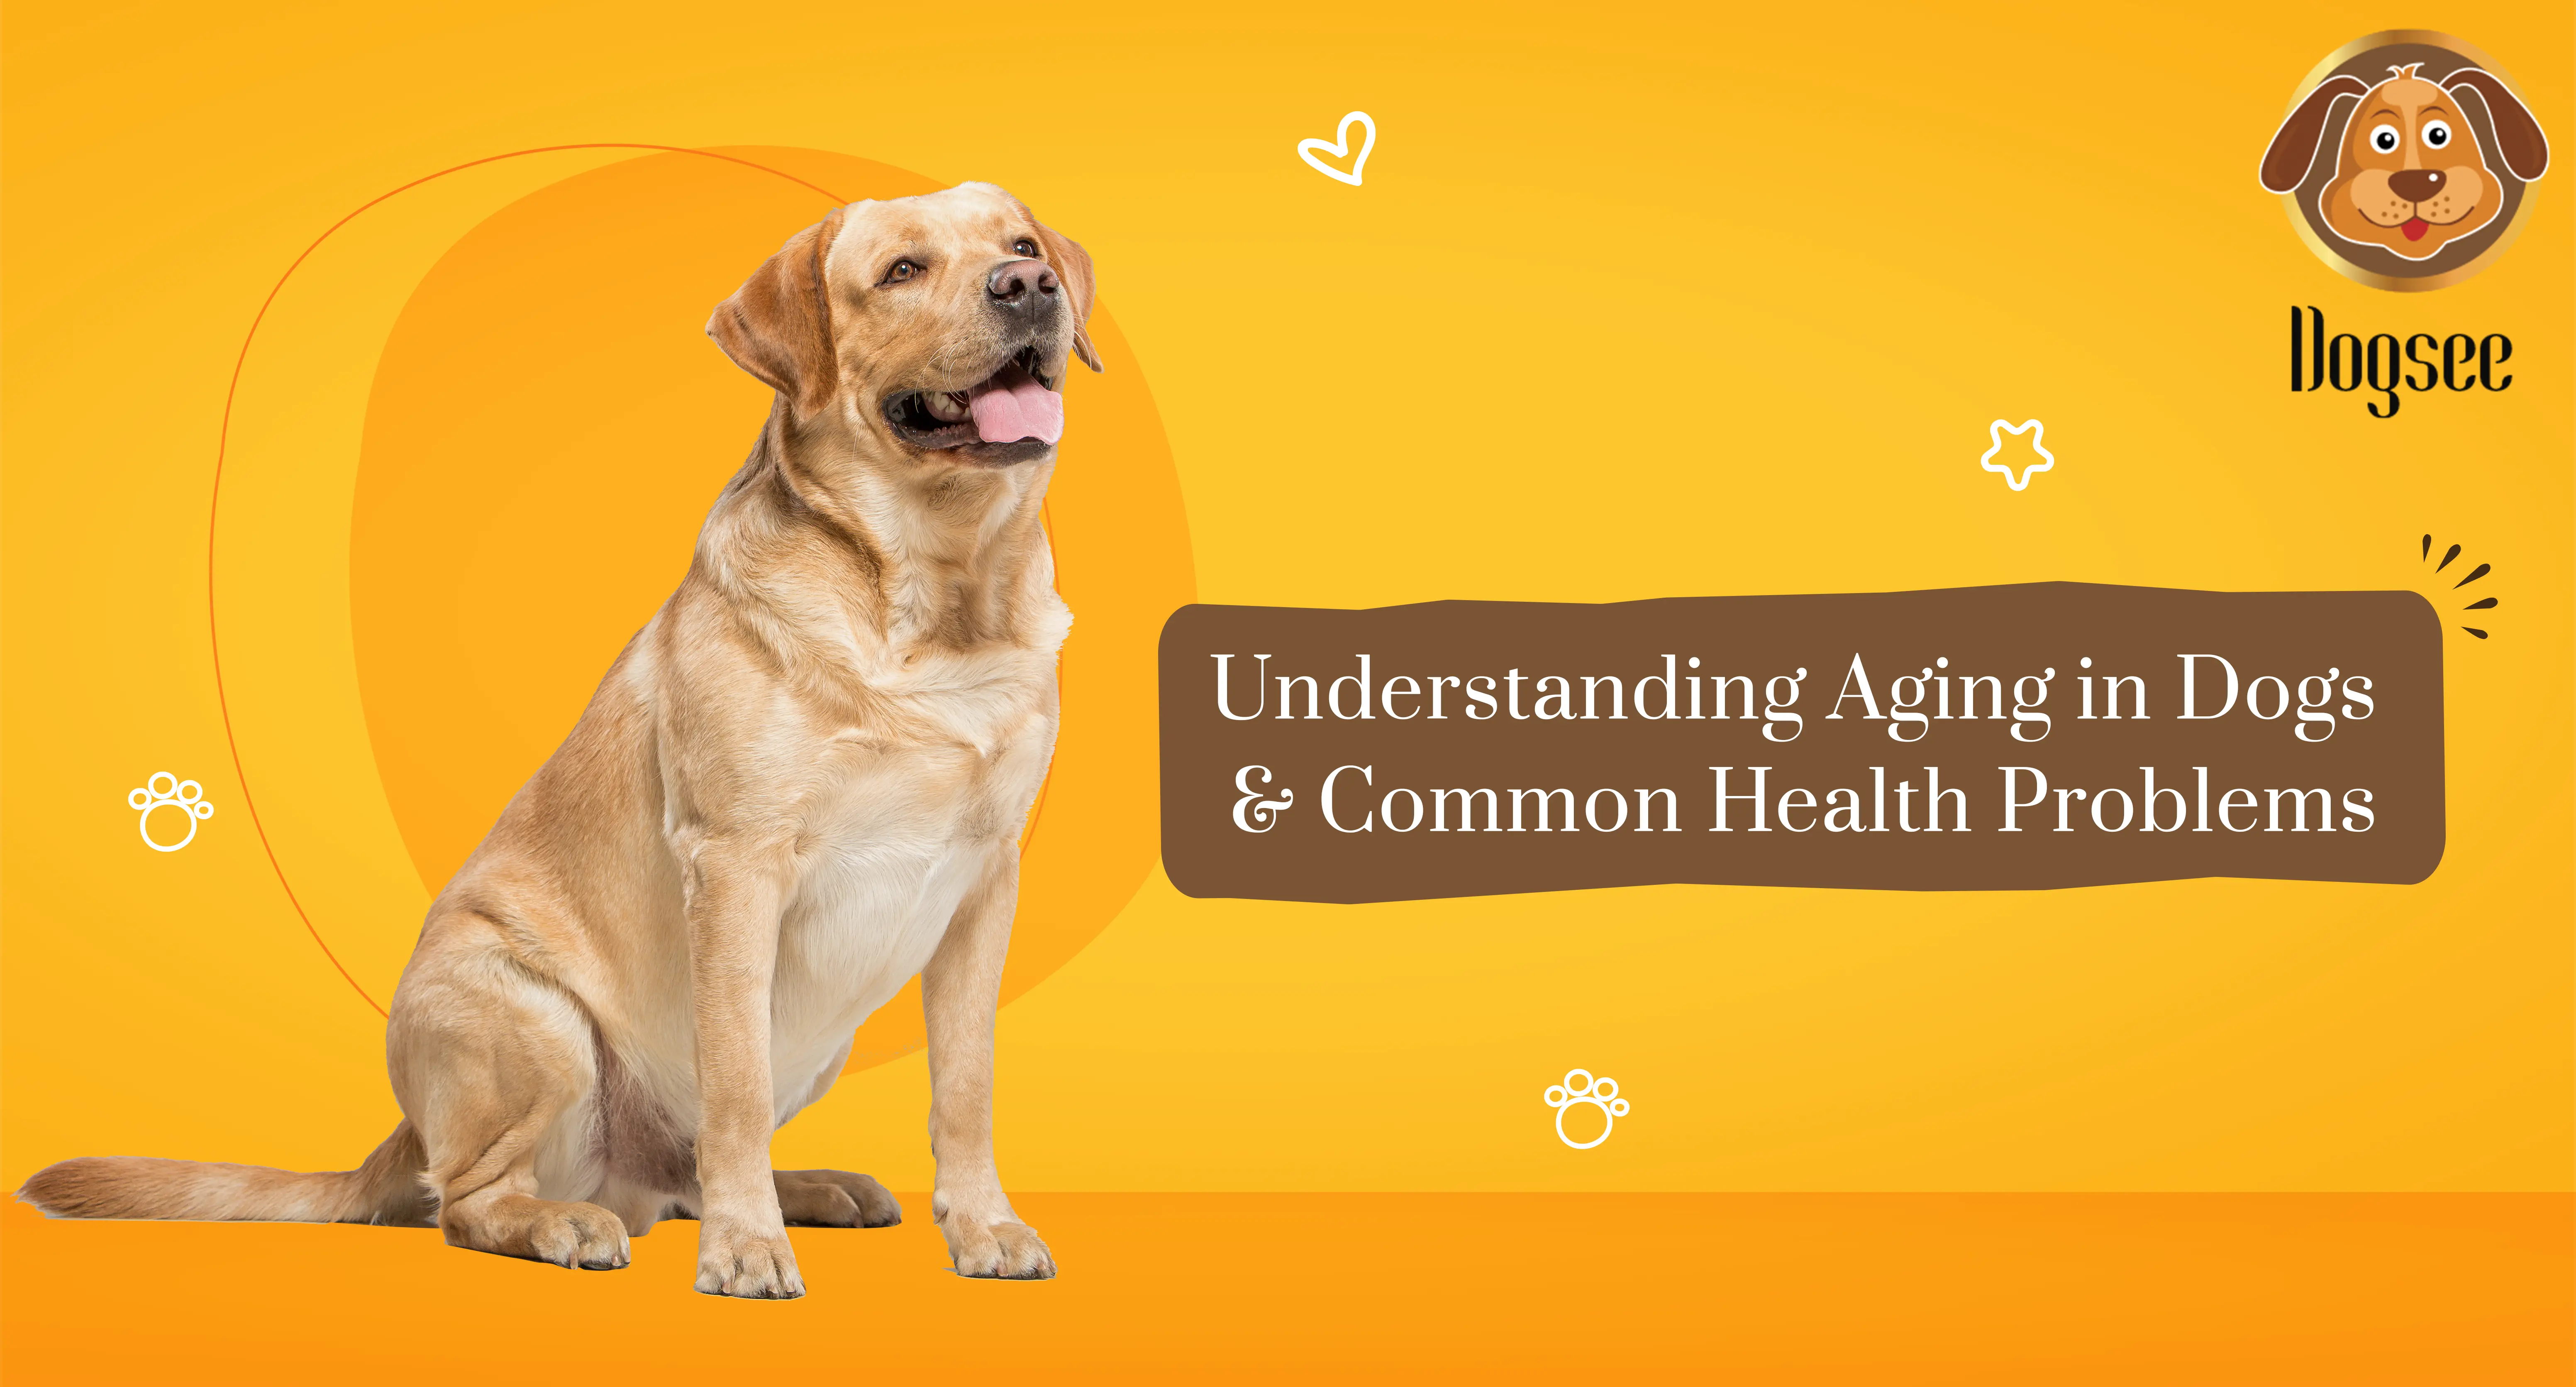 Understanding Aging in Dogs & Common Health Problems